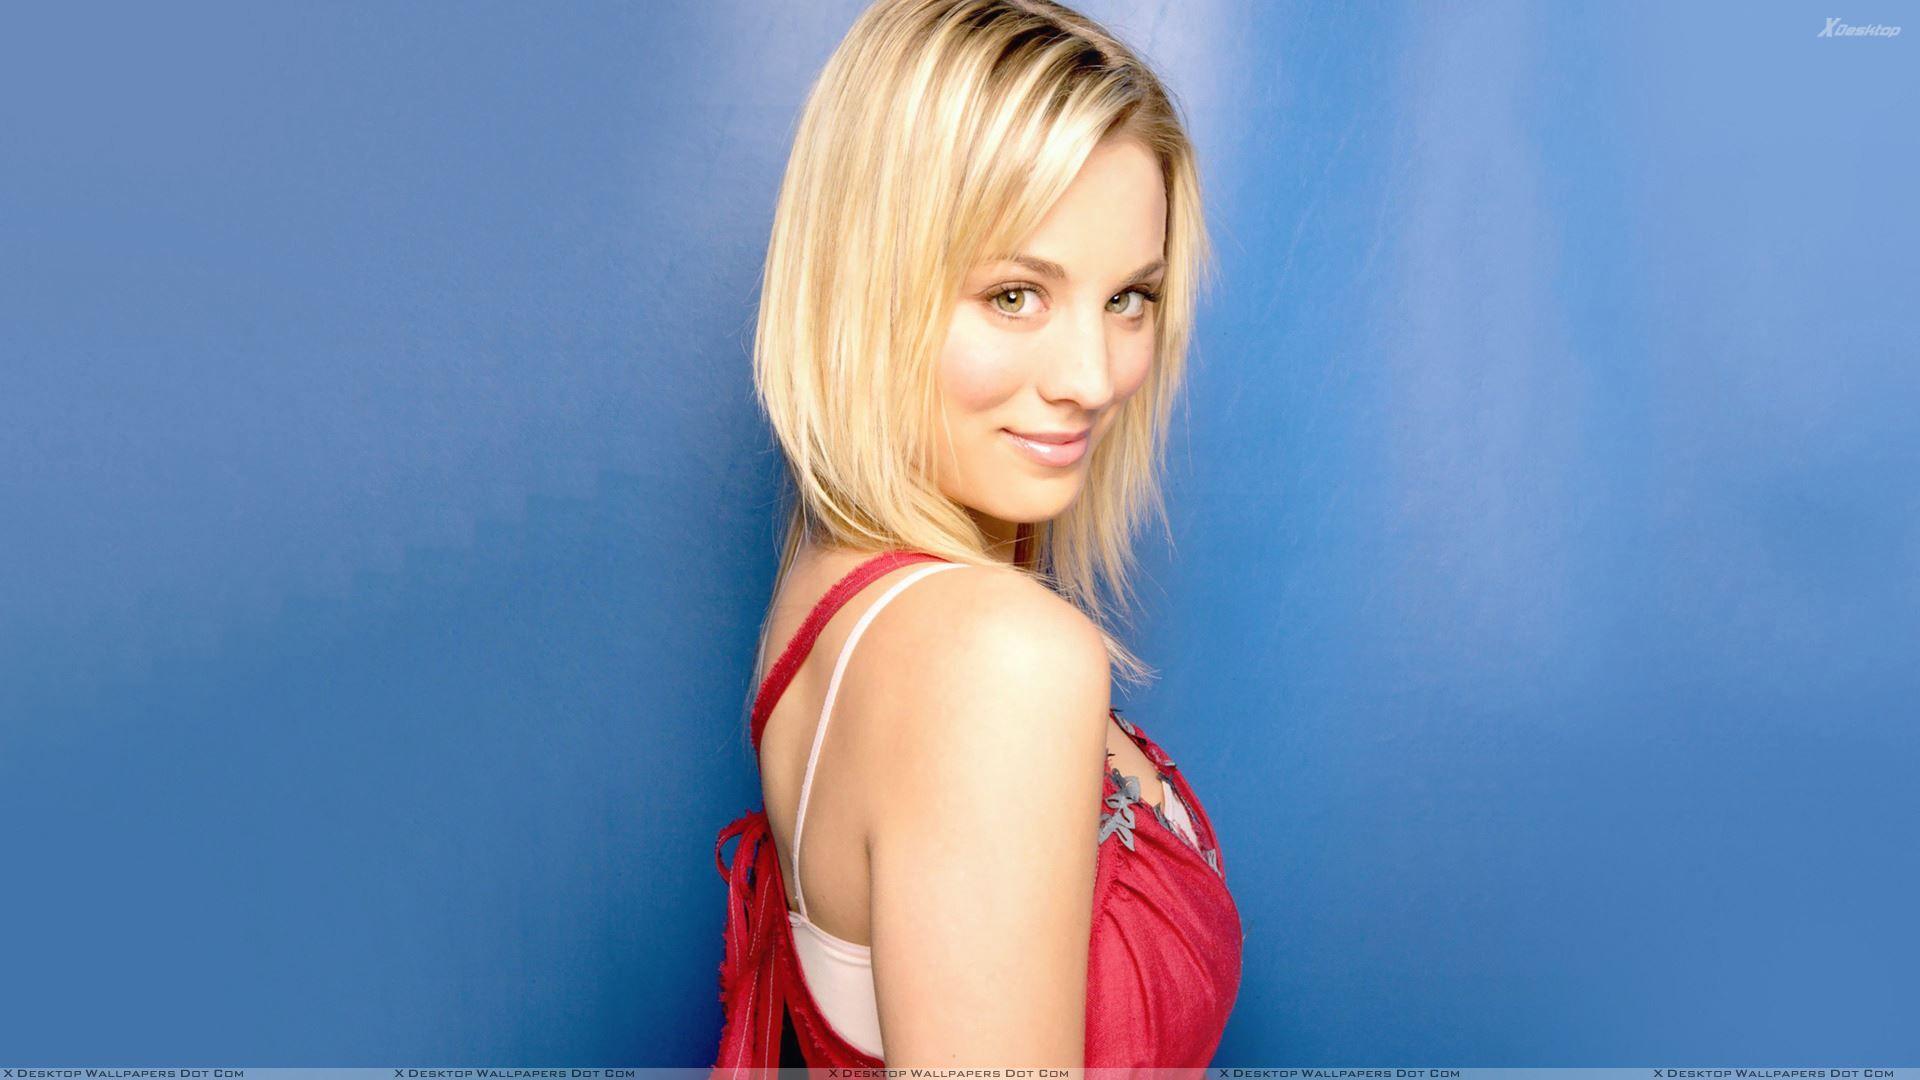 Kaley Cuoco Smiling Side Pose N Blue Backgrounds Wallpapers